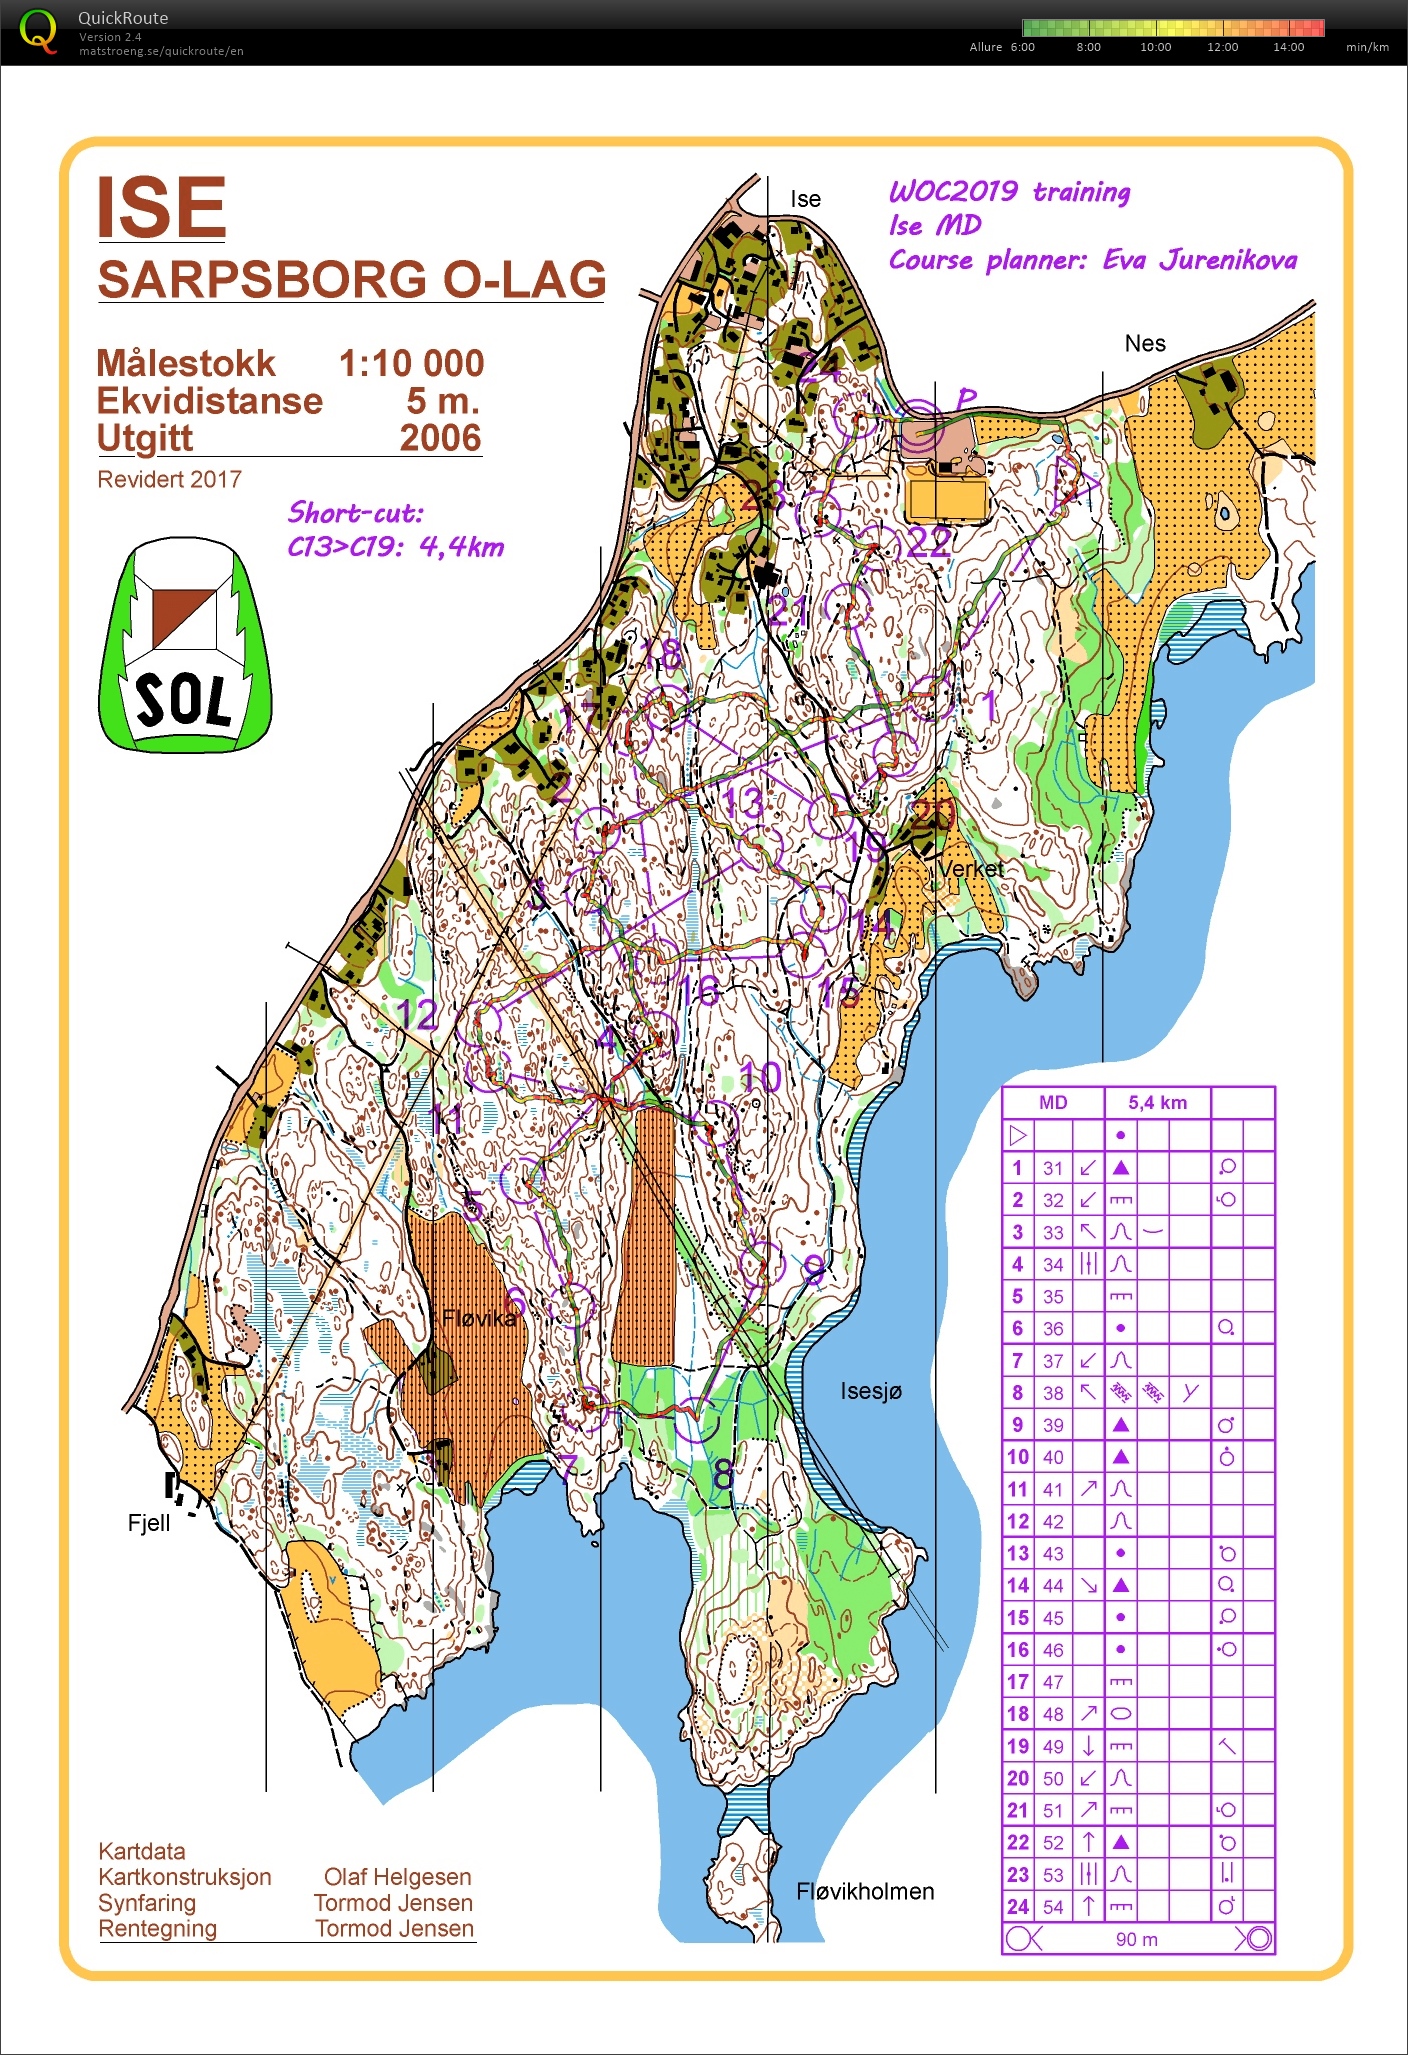 WOC 2019 training package /// pose MD Ise (13-06-2018)